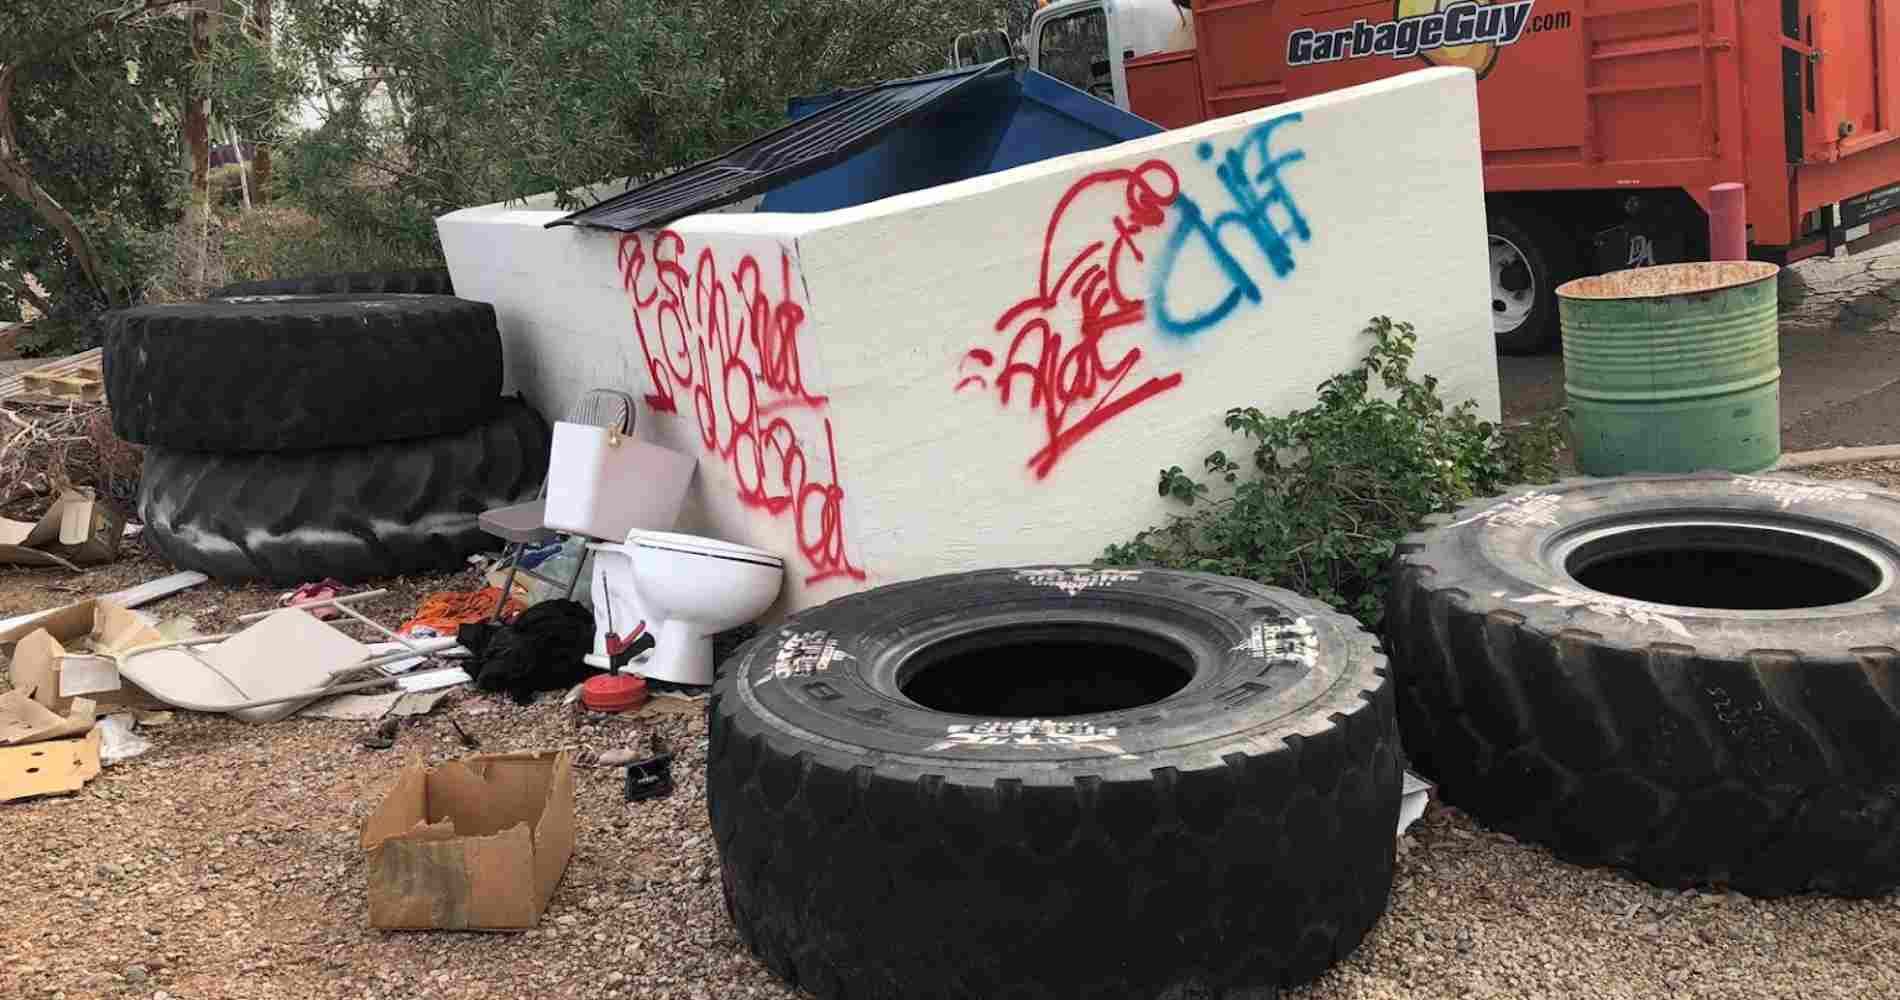 #1 for Tire Disposal in Mesa, AZ with Over 1200 5-Star Reviews!